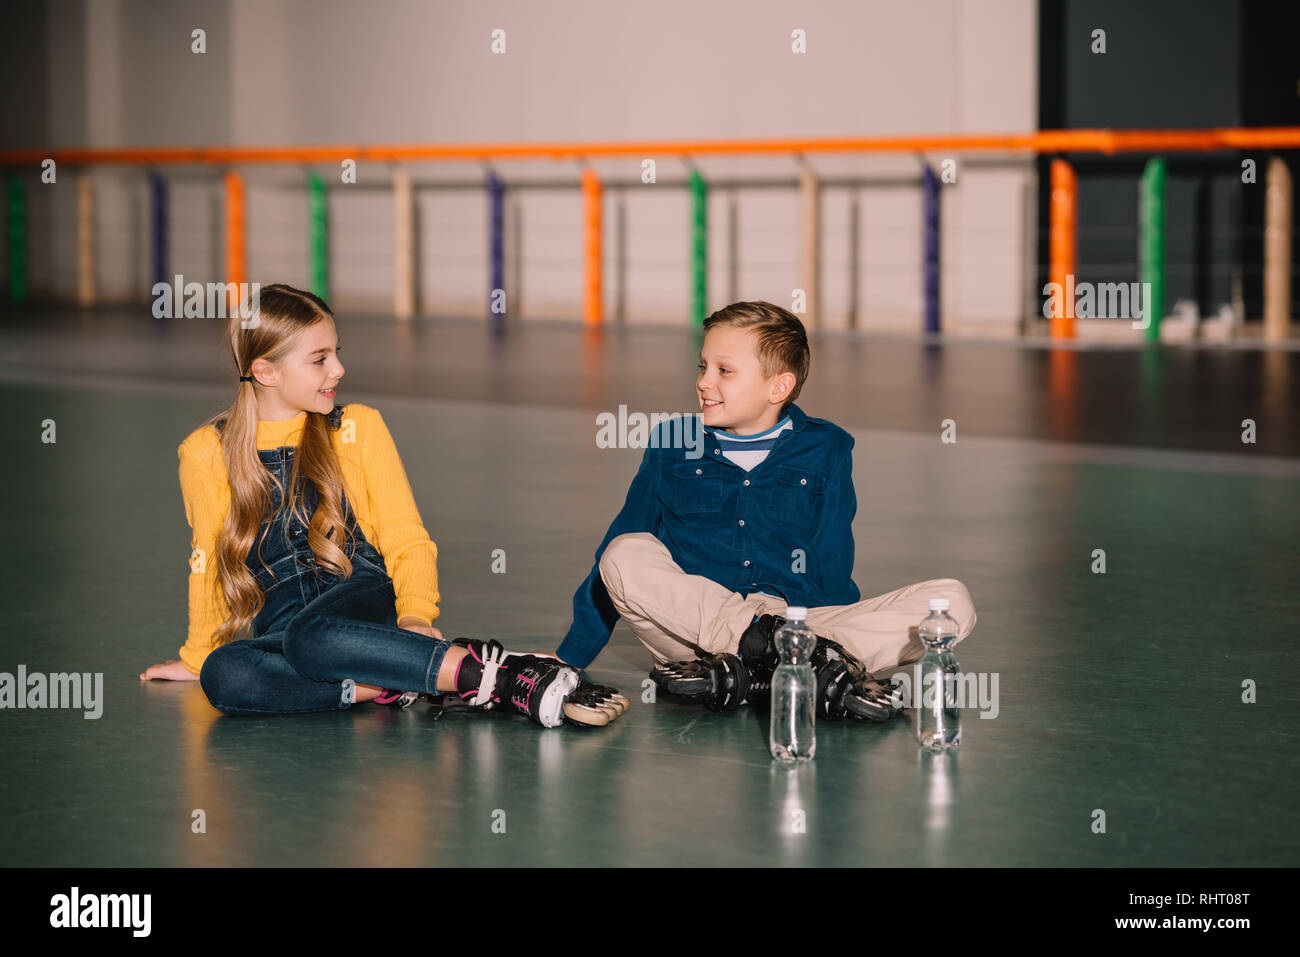 Cute kids resting after skating with roller skates Stock Photo